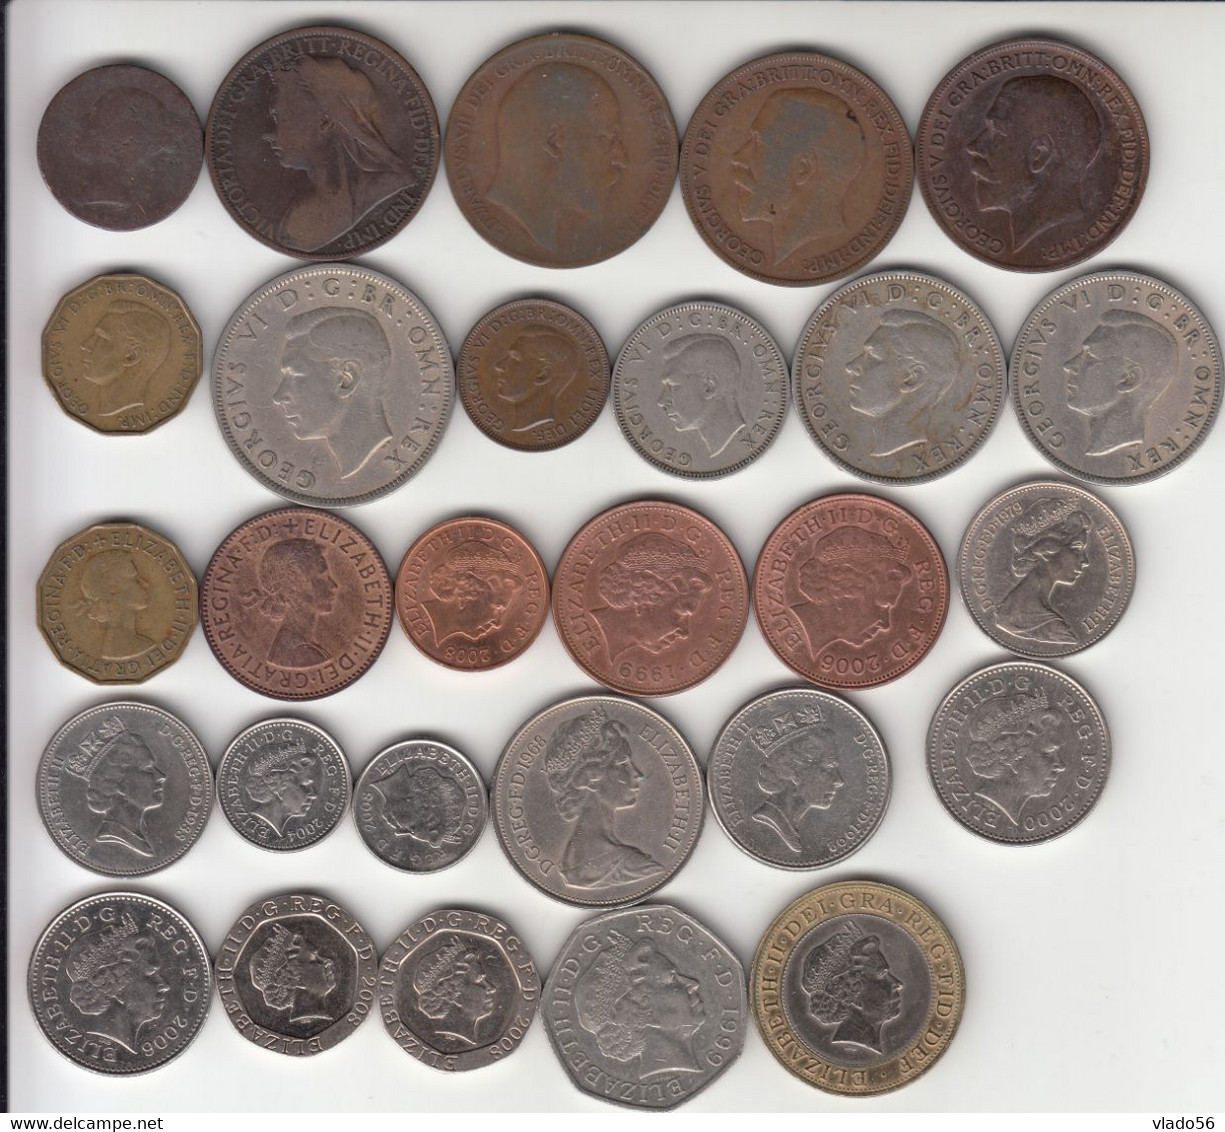 GREAT BRITAIN  - LOT 27 DIFFERENT COINS FROM  1 FARTHING 1847 UP TO  2 POUNDS 2008 ,  LM1.23 - Sammlungen